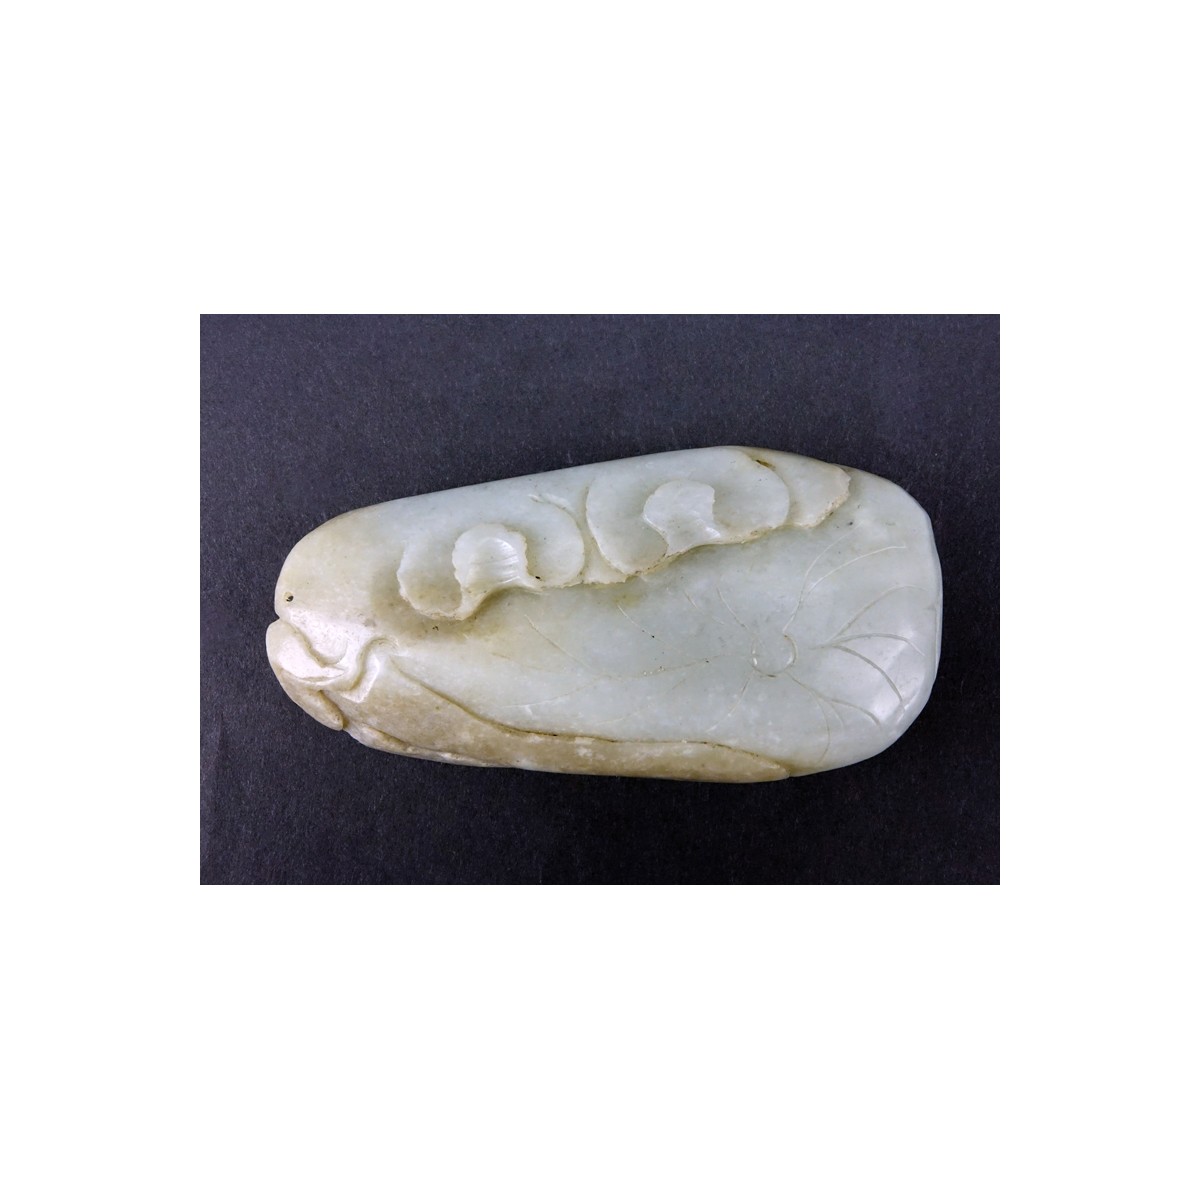 19/20th Century Chinese Carved Jade Pendant. Natural wear. Measures 4" H x 2" W.  (estimate $50-$10